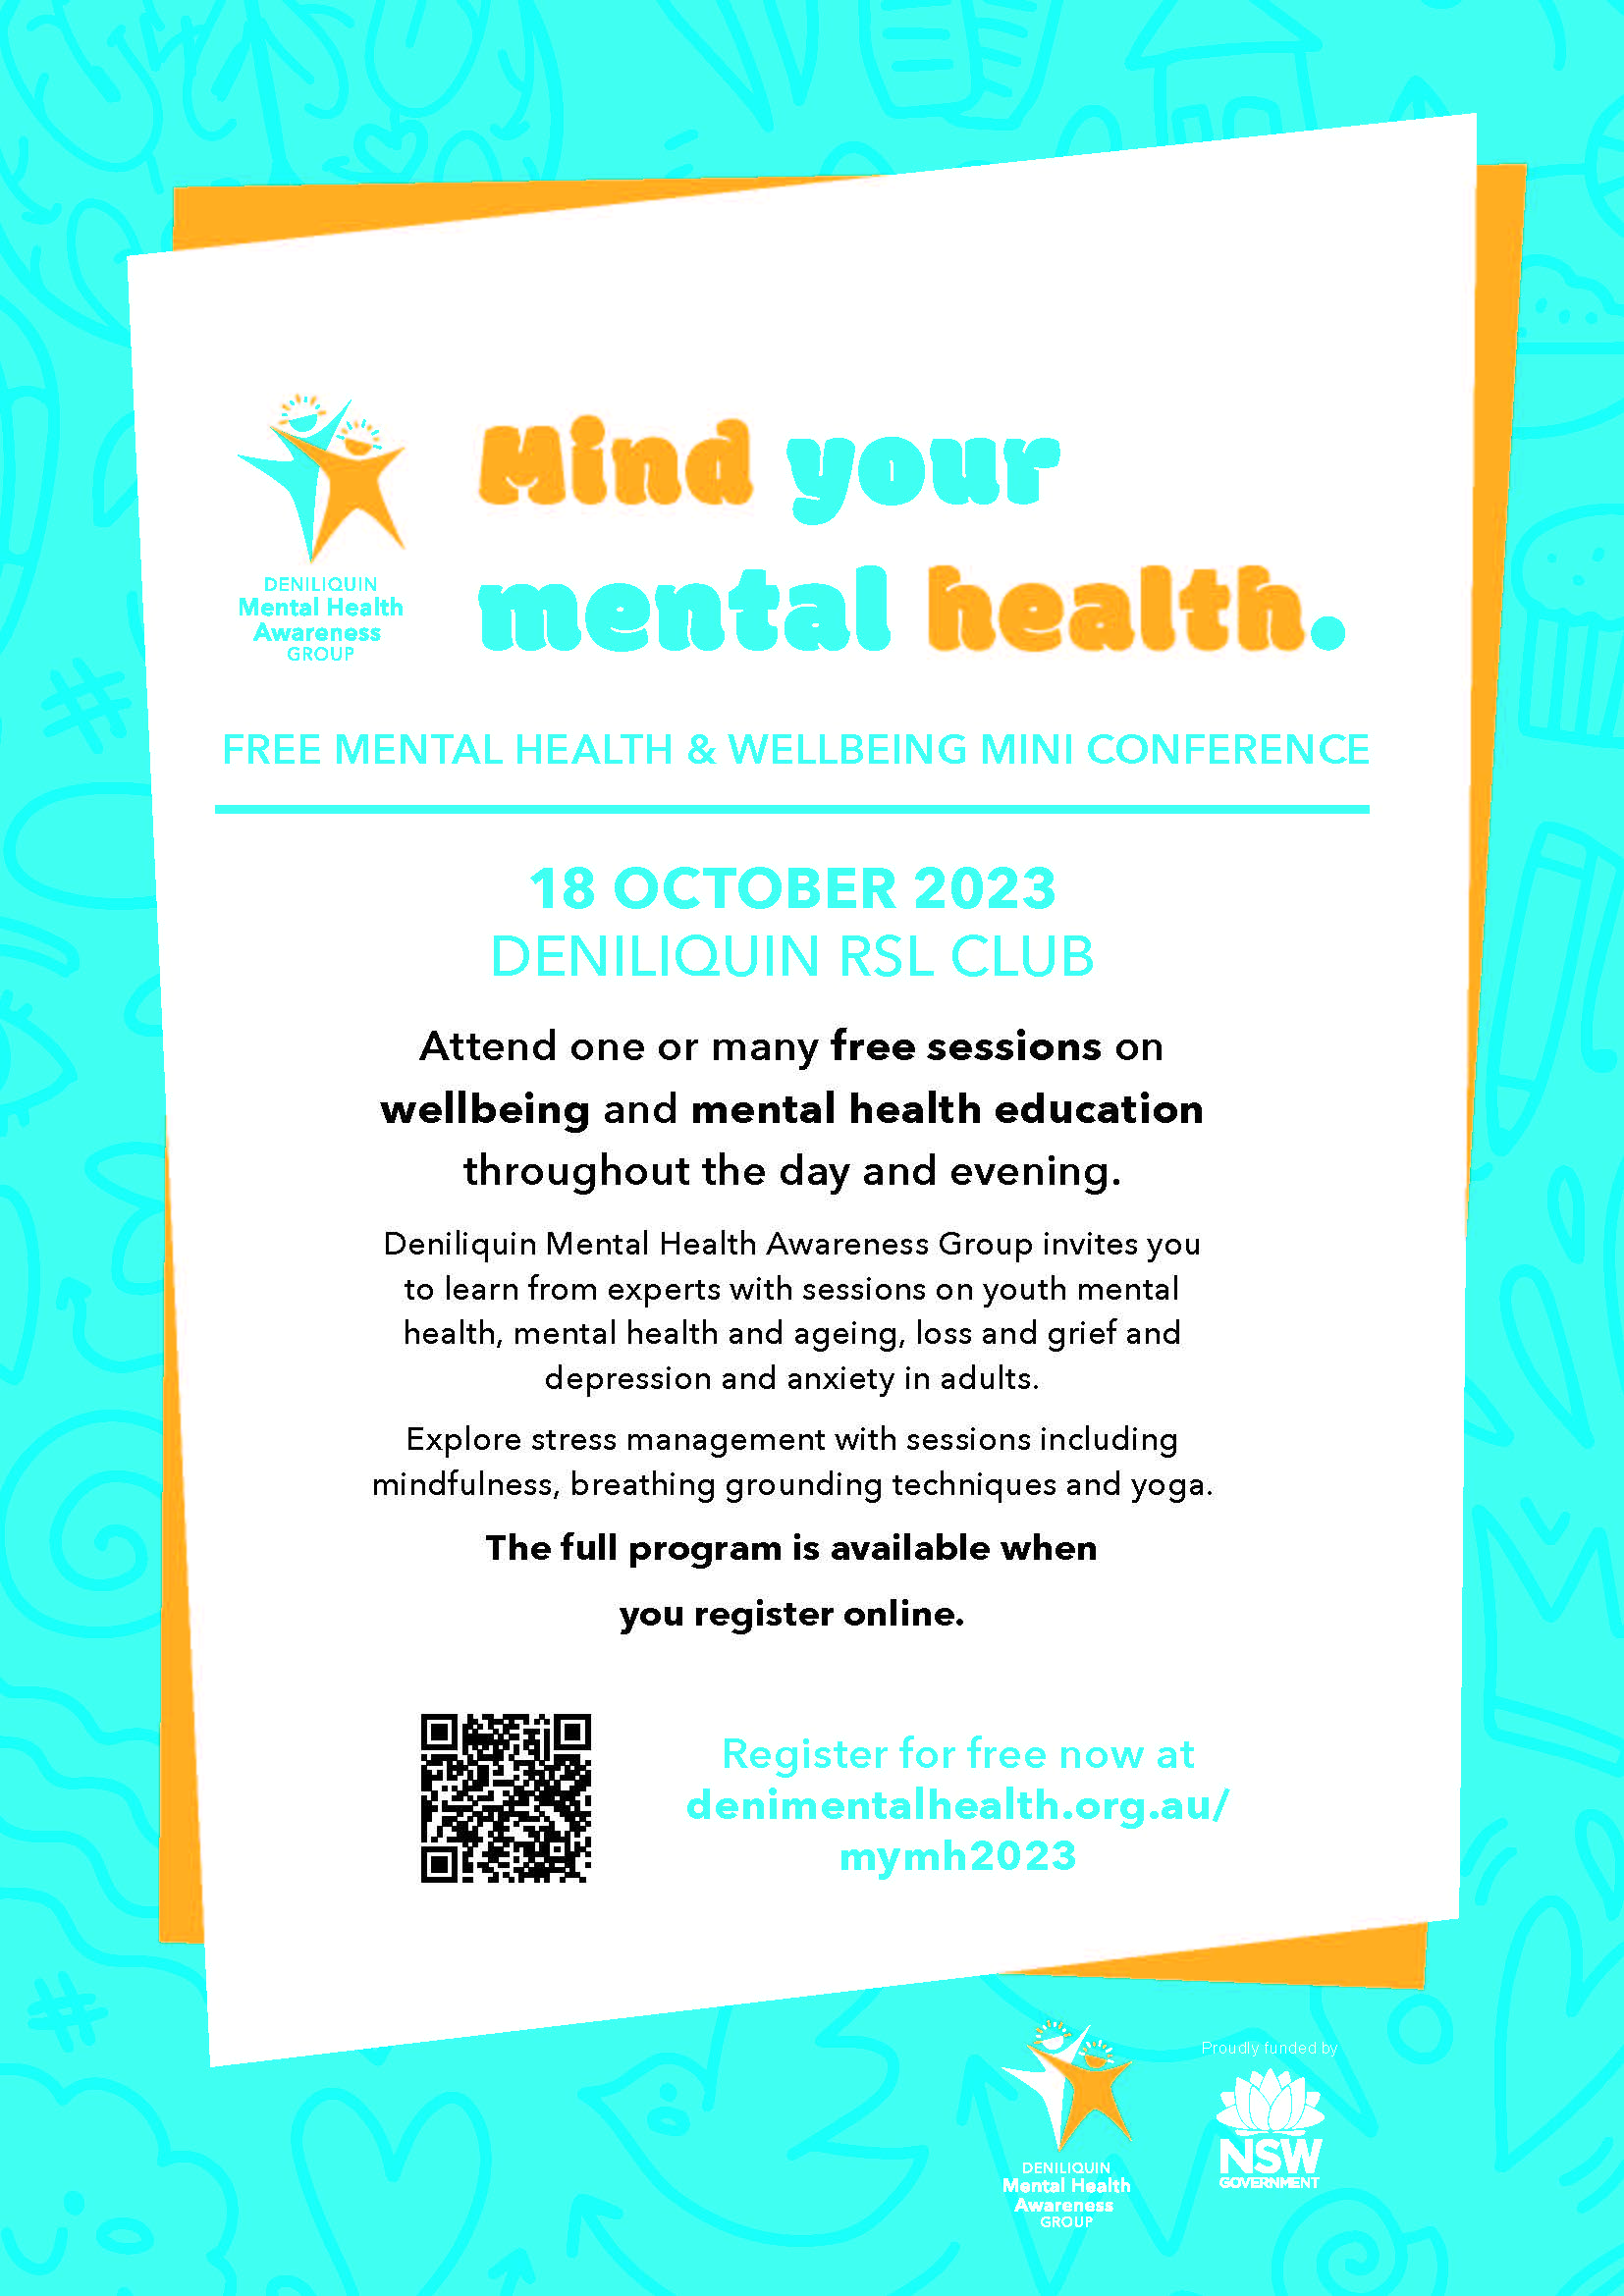 Mind Your Health - Free mental health conference - Deniliquin